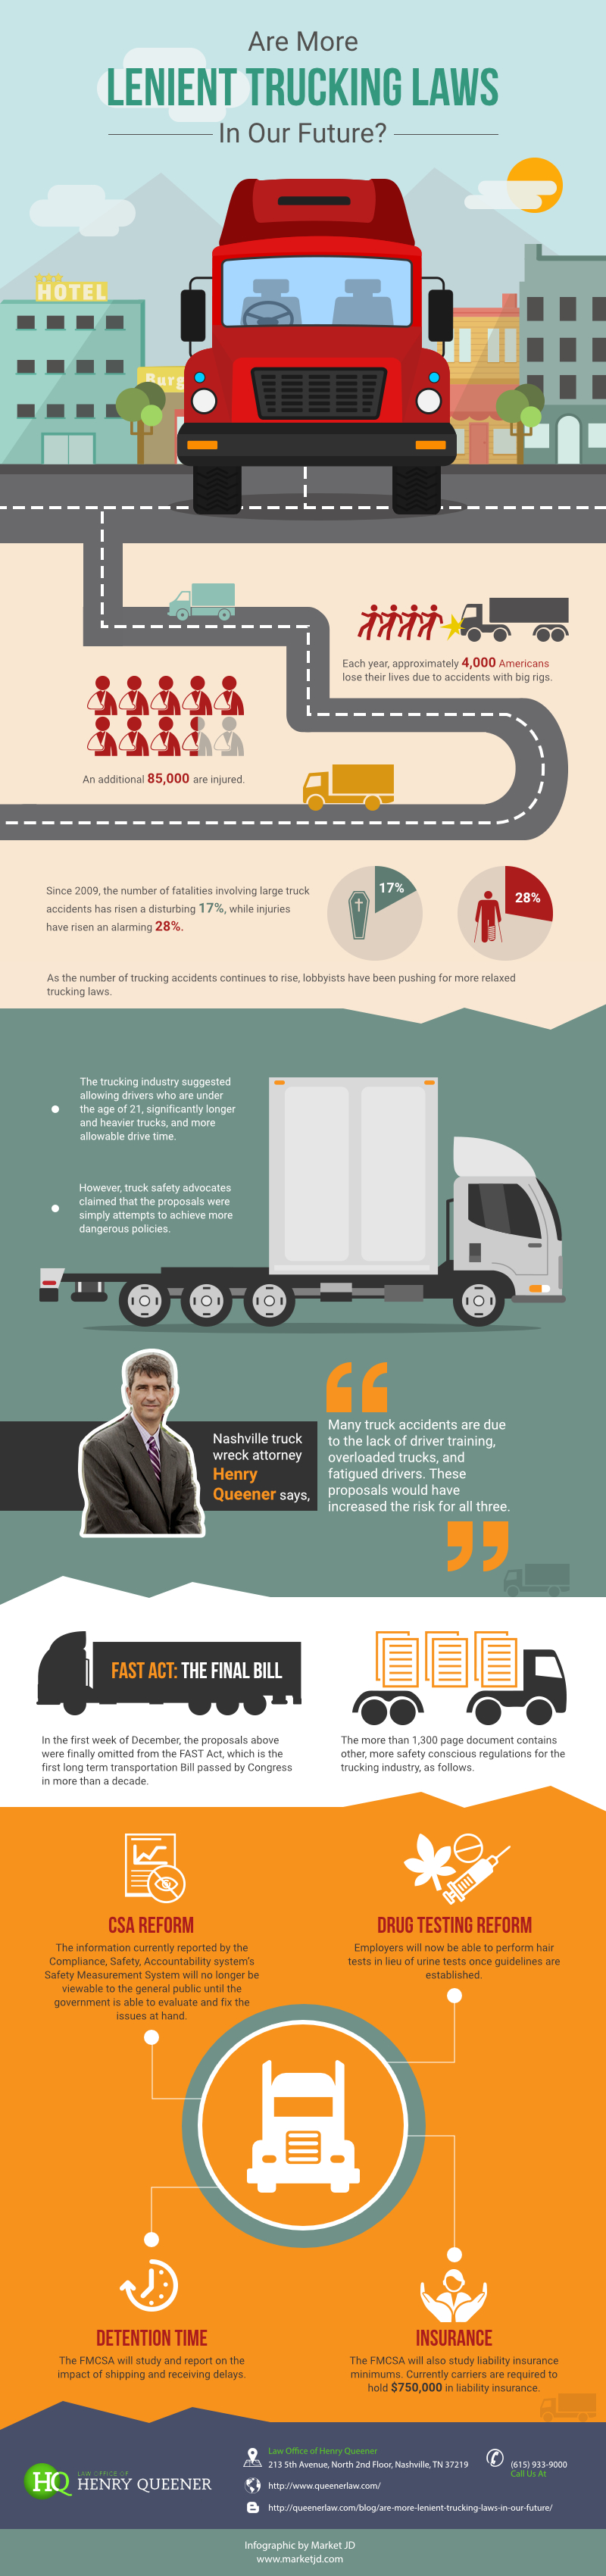 image showing lenient trucking laws Queener Law